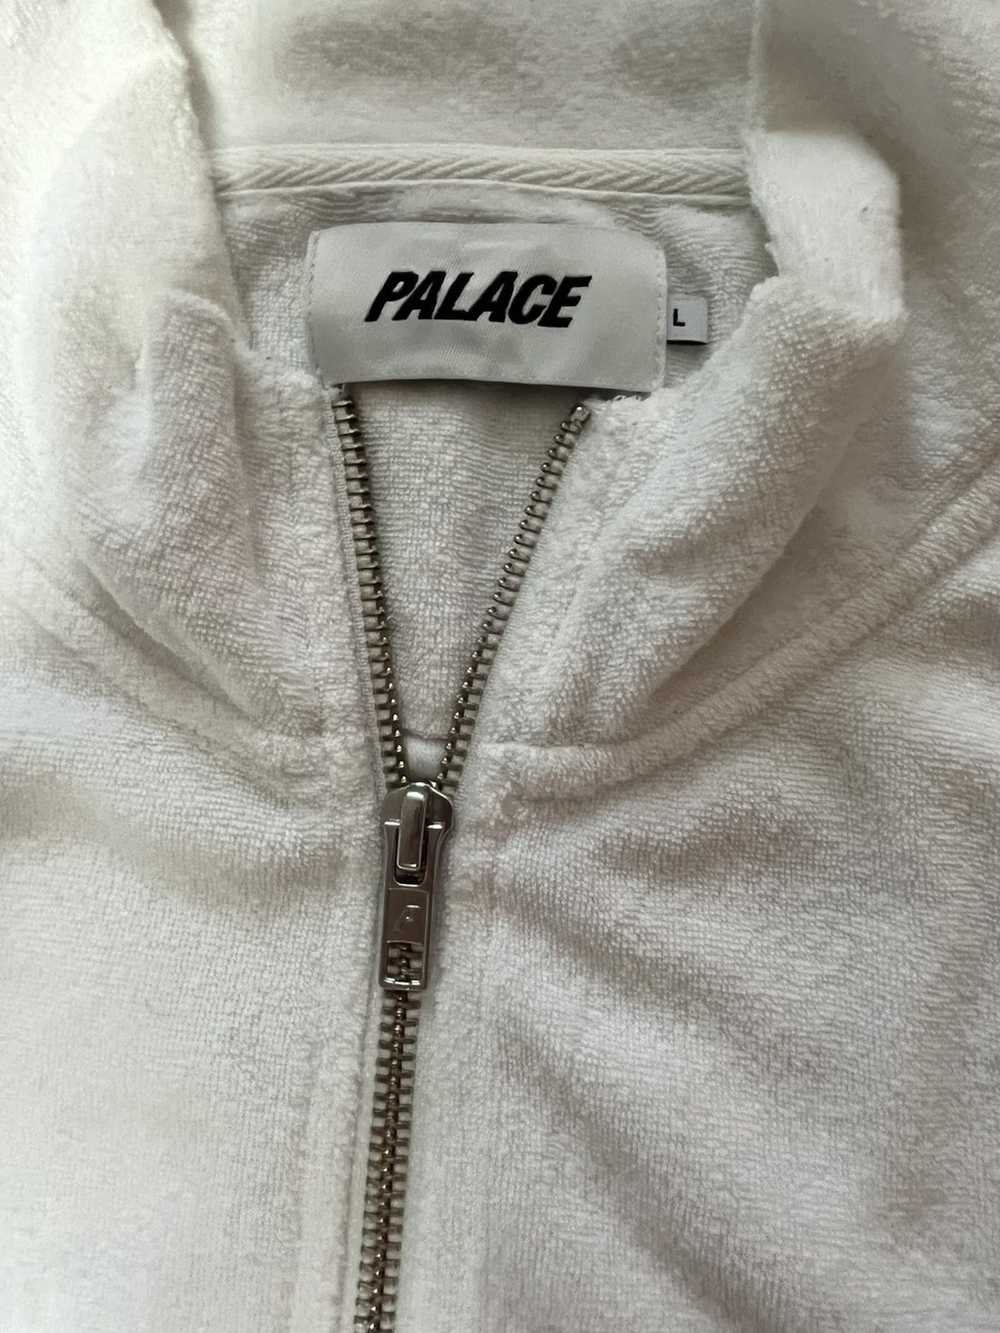 Palace Ultra Relax Trouser Black